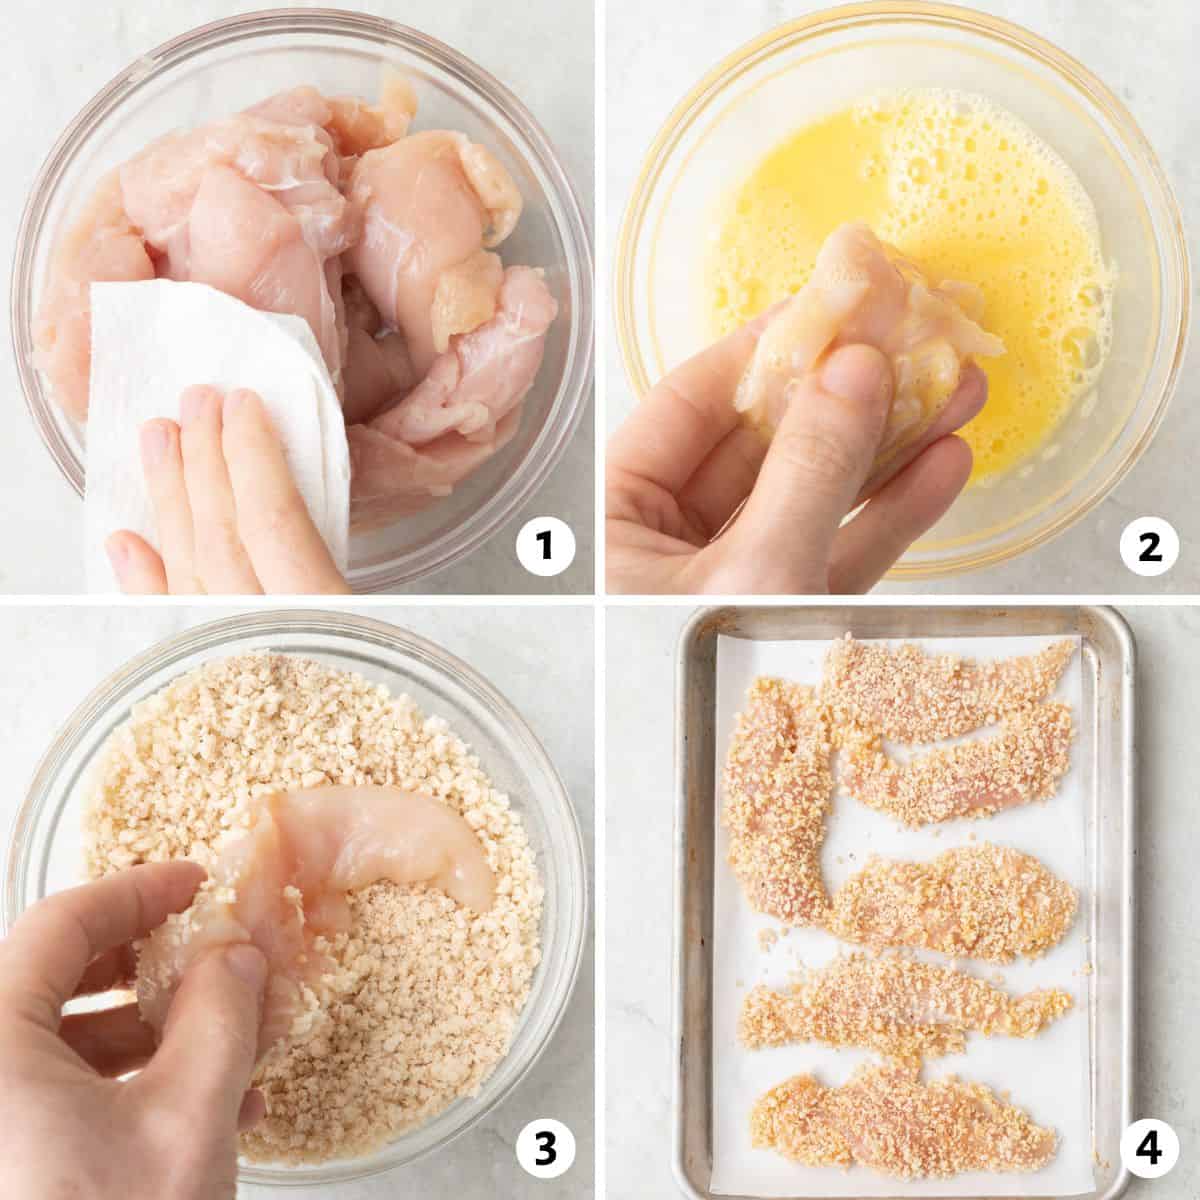 4 image collage making recipe: 1- chicken tenders in a bowl being patted dry with paper towels, 2- dipping a tender into a whisked egg, 3- coating tender in panko breadcrumbs, and 4- coated tenders on a parchment line baking sheet.